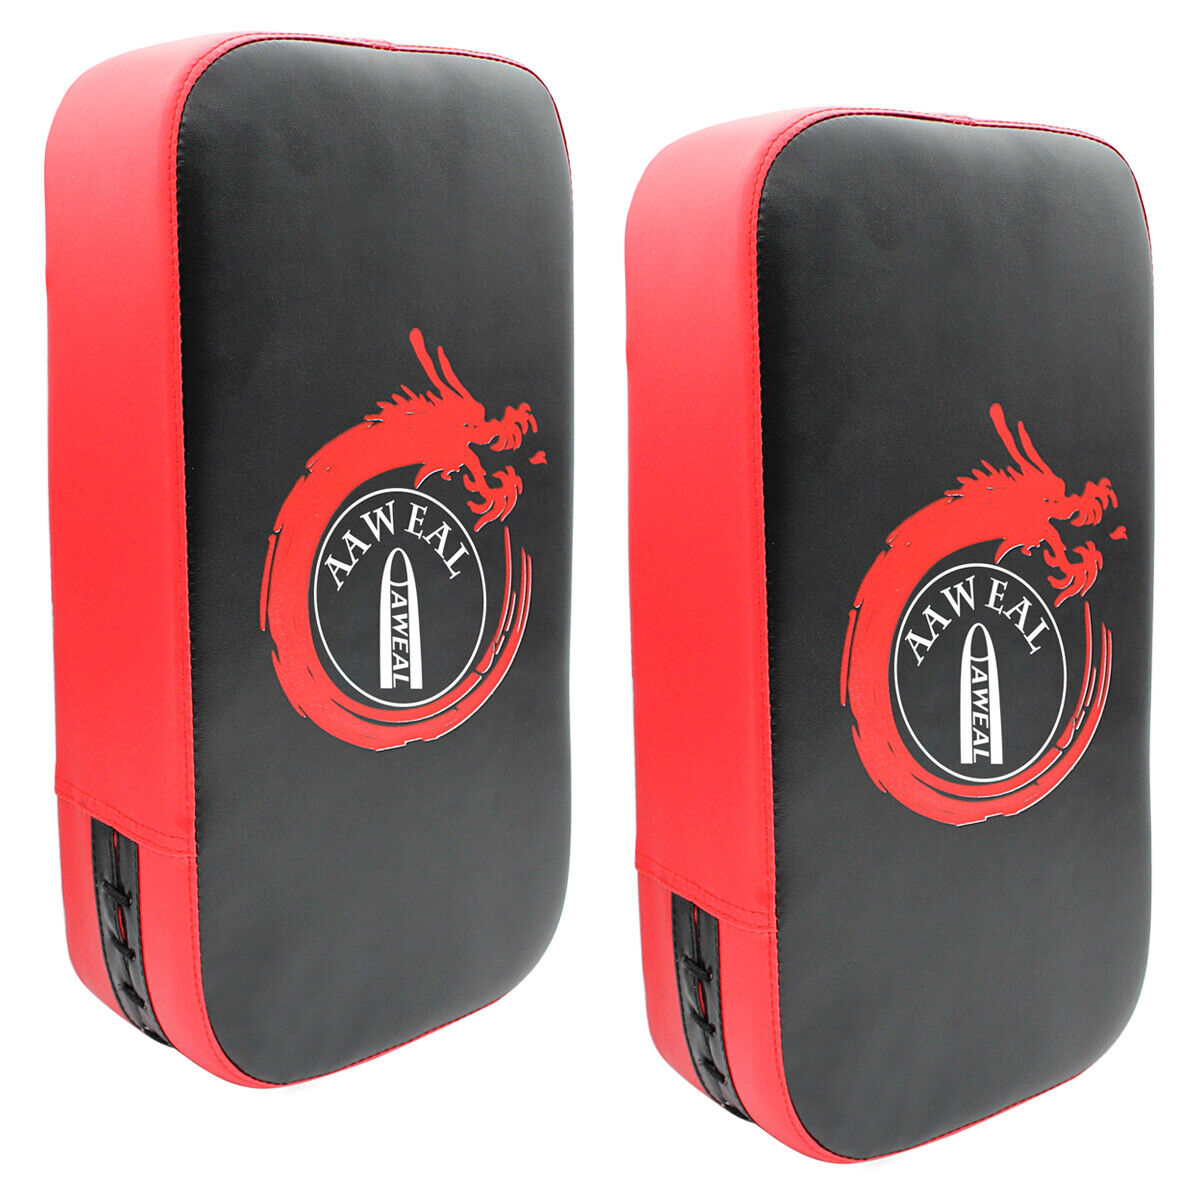 Kick Shield Boxing Punching Pads Strike Arm Curved MMA Focus Muay Thai Training Aaweal Does Not Apply - фотография #6